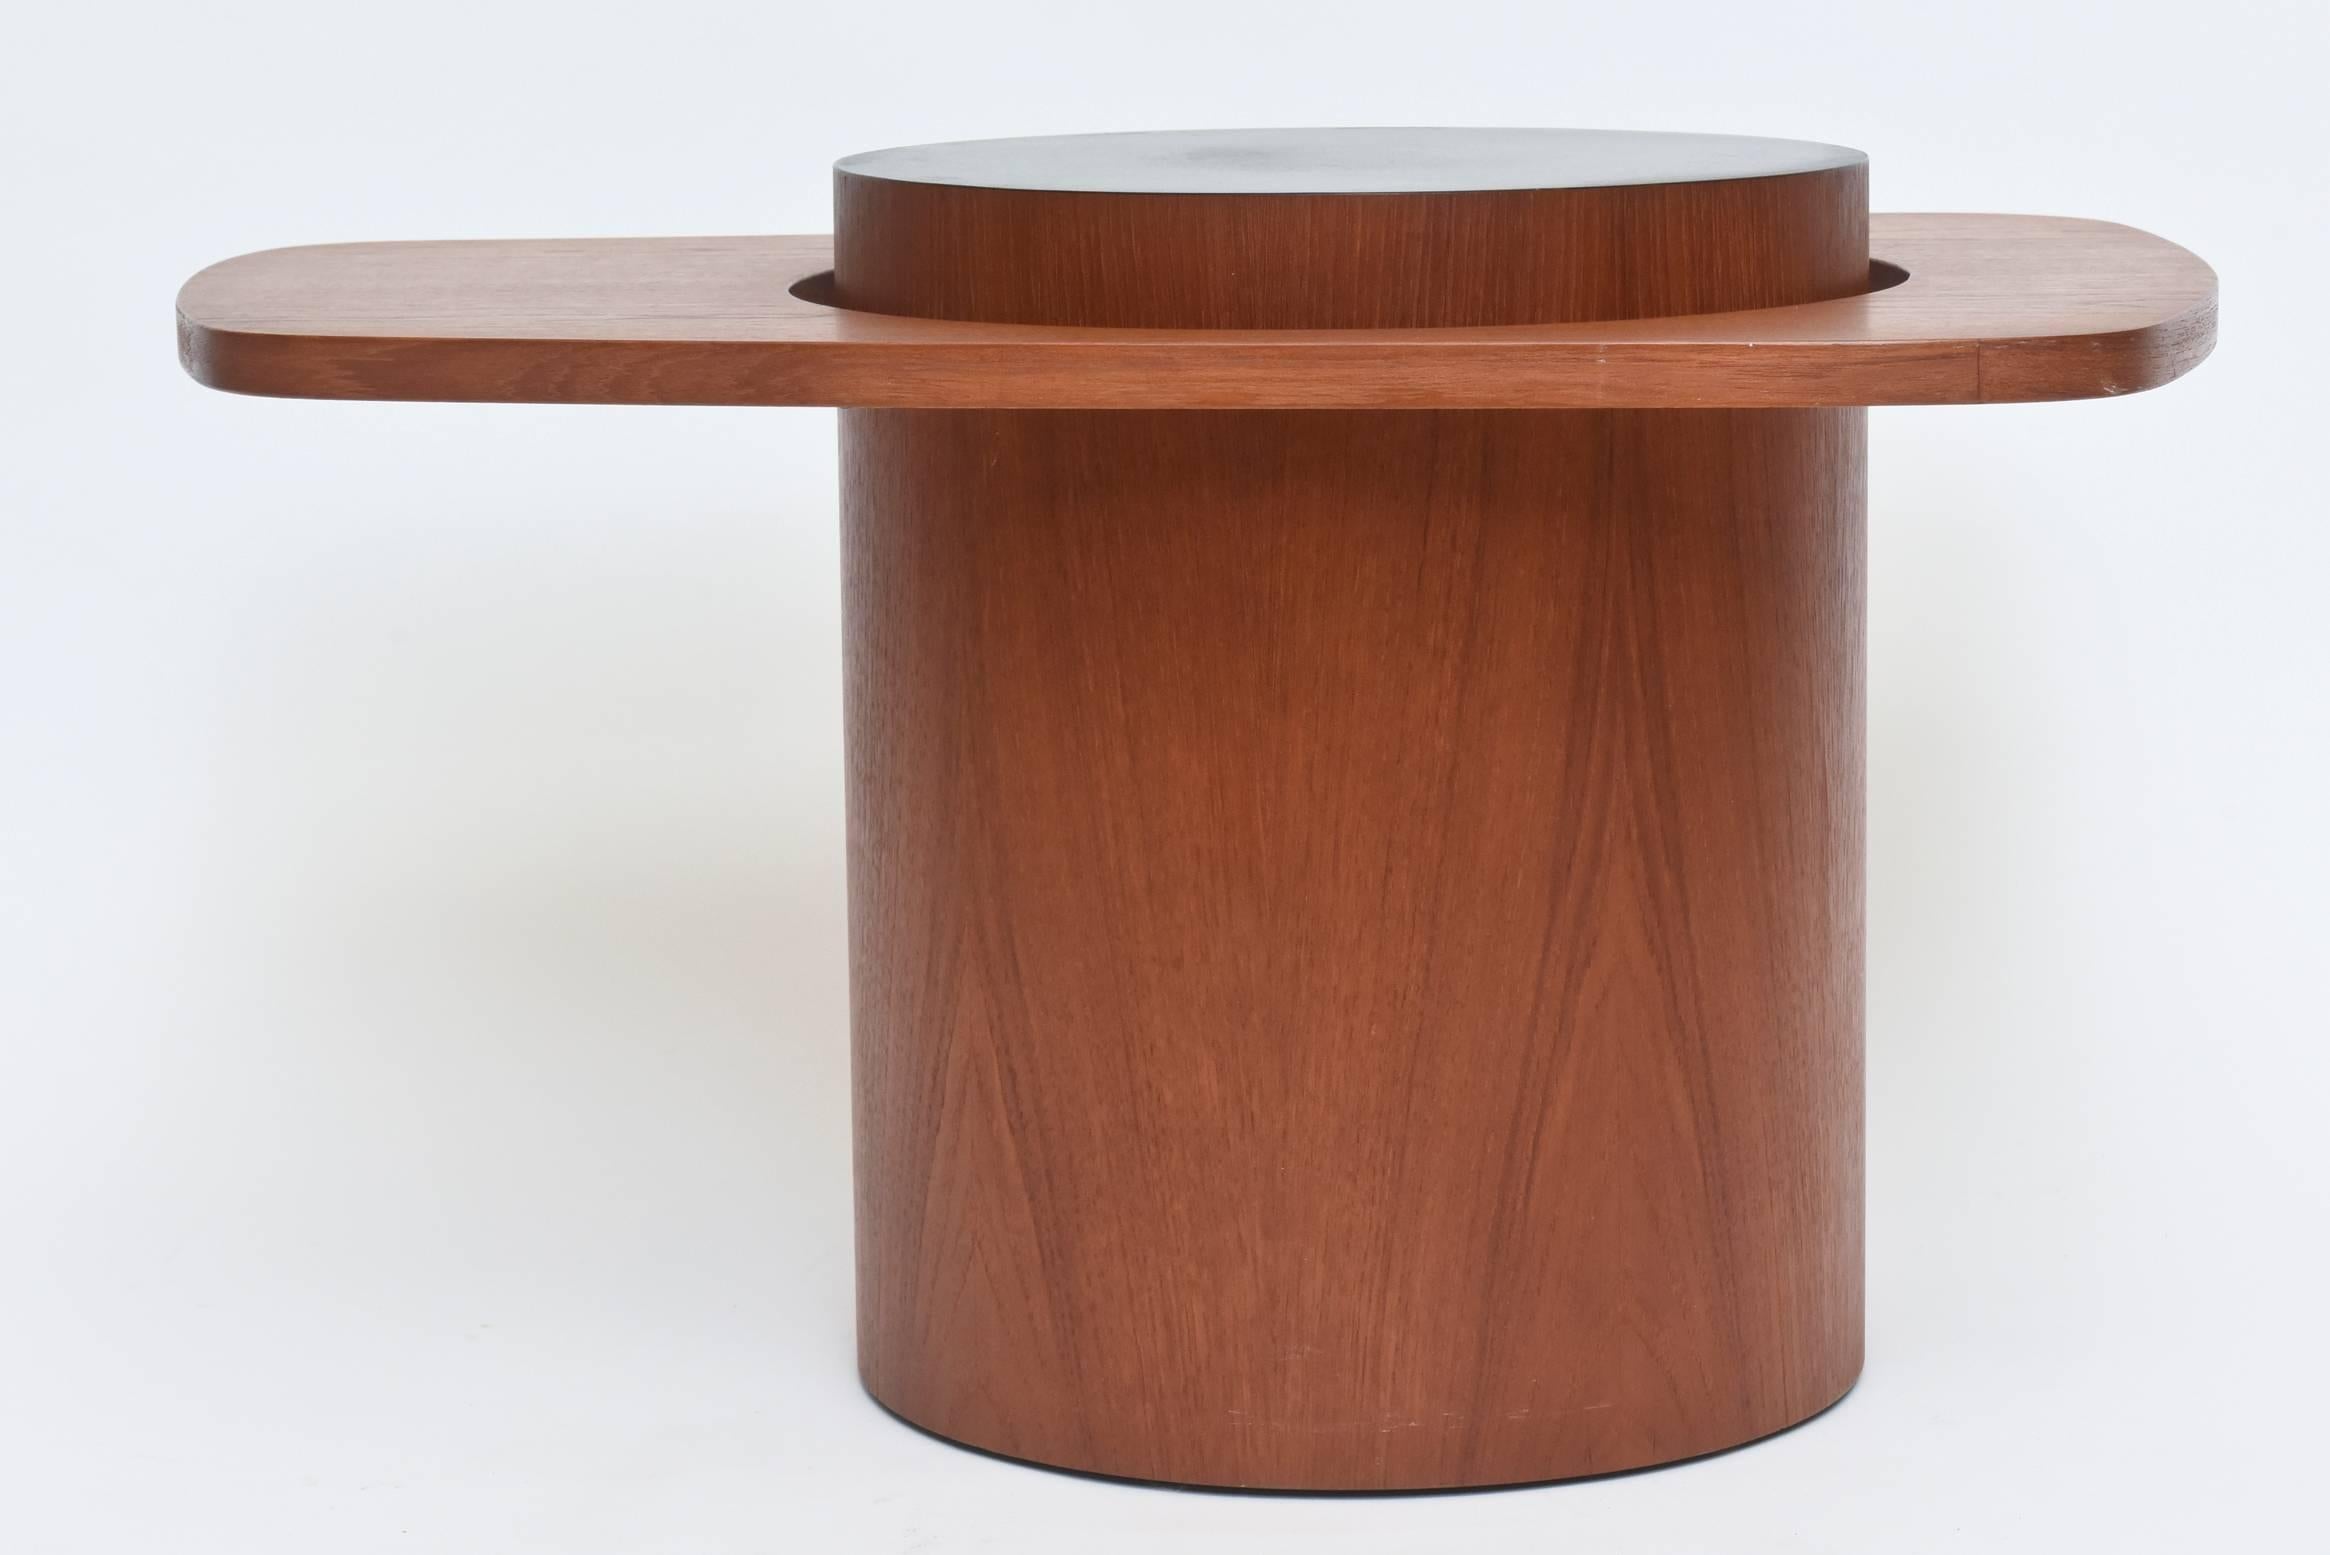 A Canadian Midcentury Classic, this modern teak low table by RS Associates, was designed for EXPO 1967 in Montreal. The top hovers above giving the appearance that it is separate from the base.
 